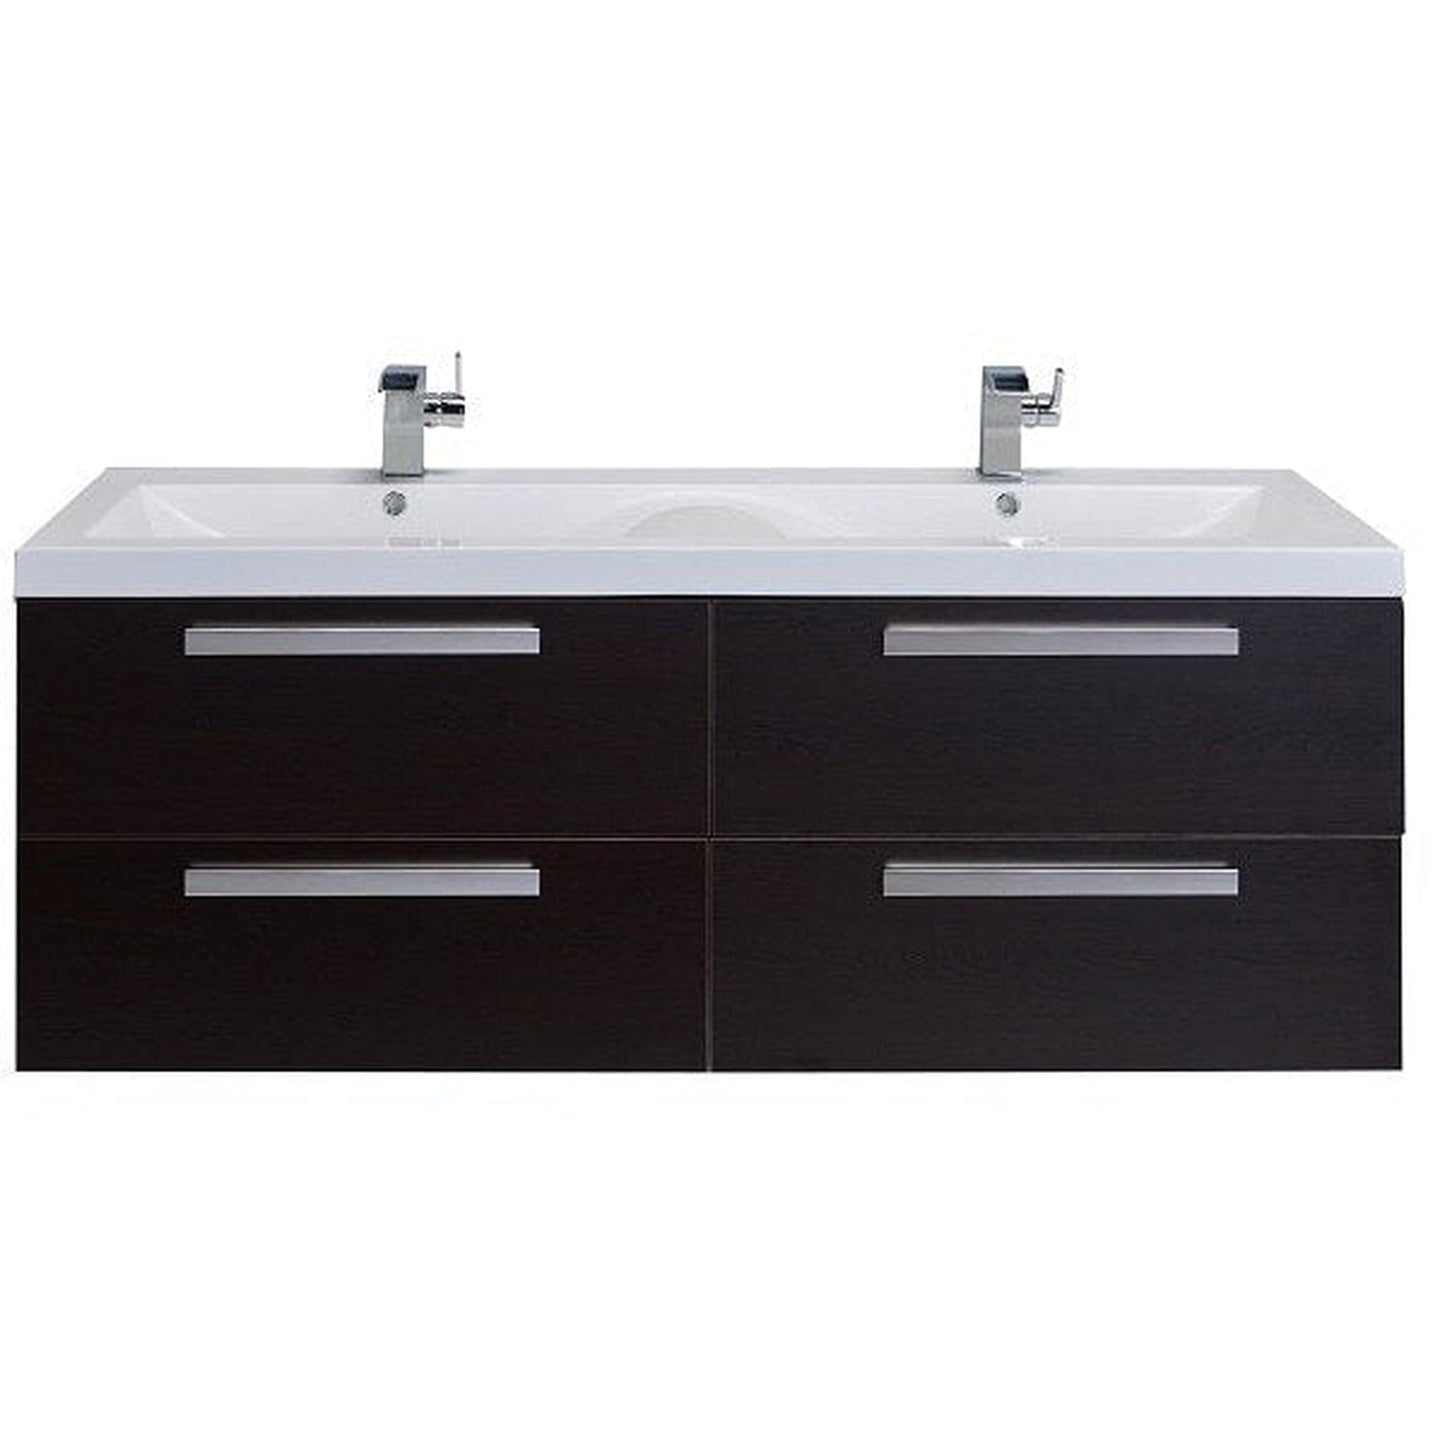 Eviva Surf 57" x 24" Wenge Wall-Mounted Bathroom Vanity With Double White Integrated Sink